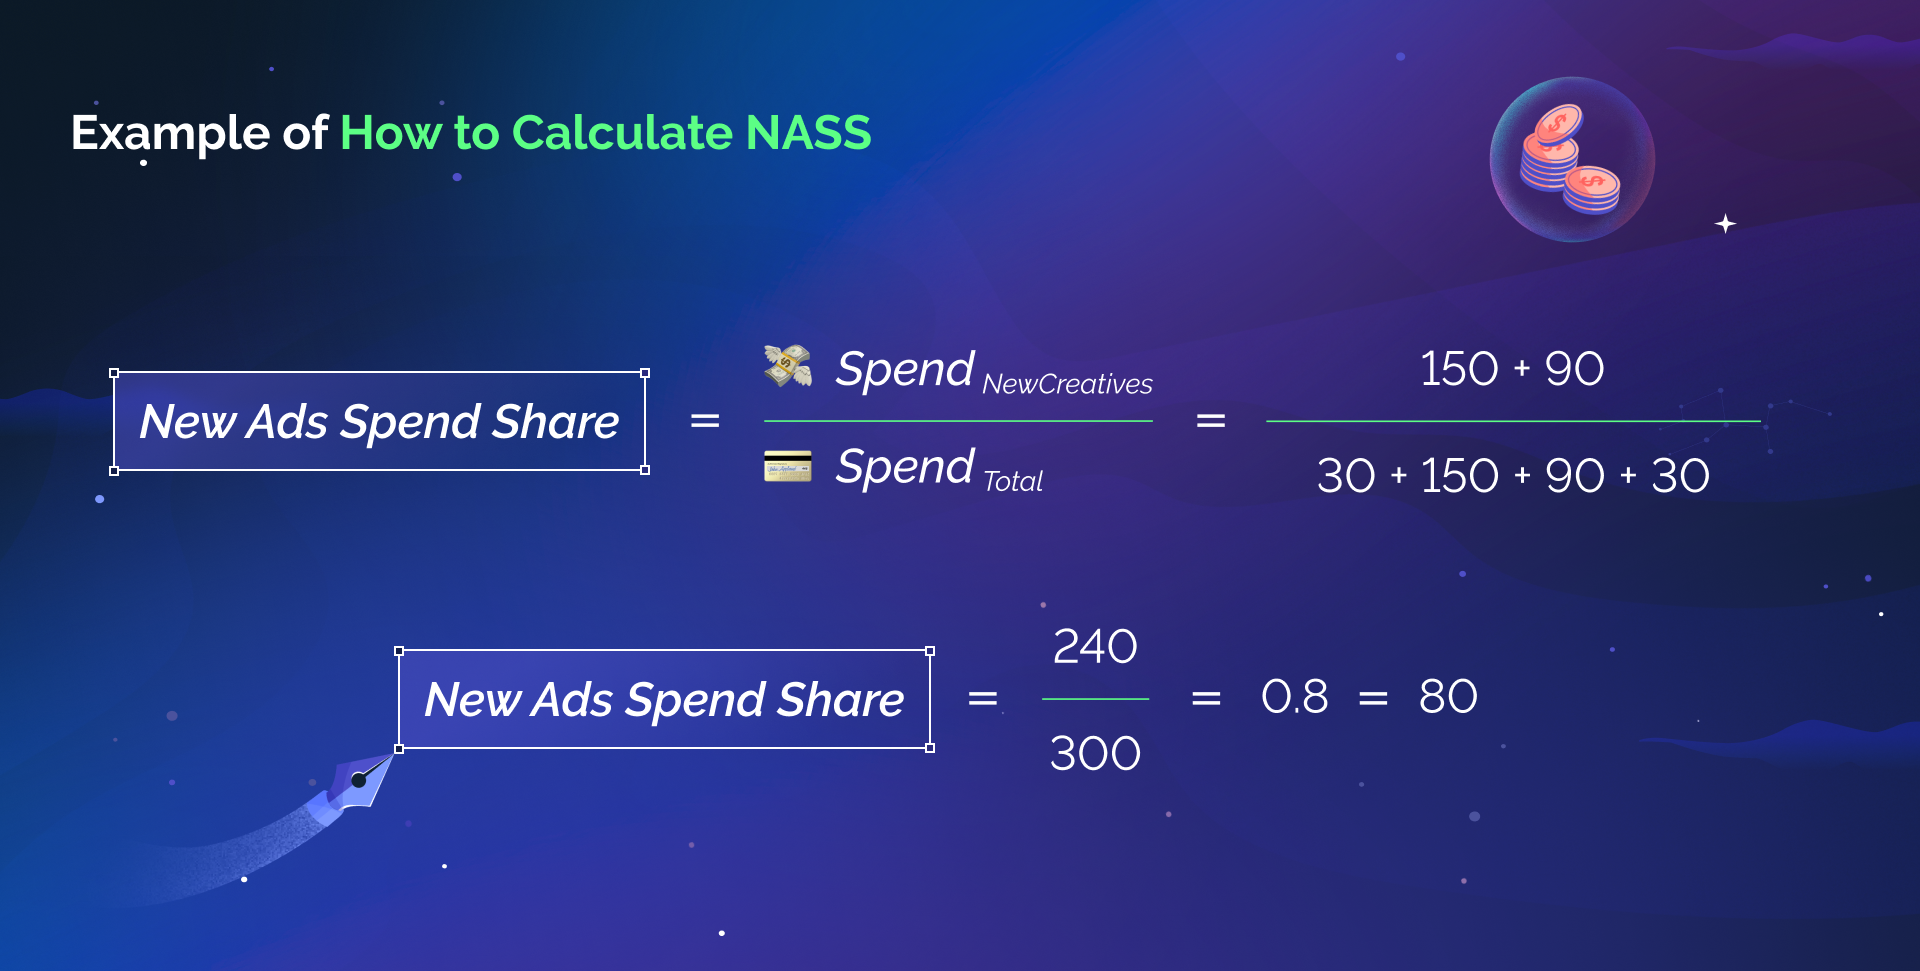 Example of How to Calculate NASS